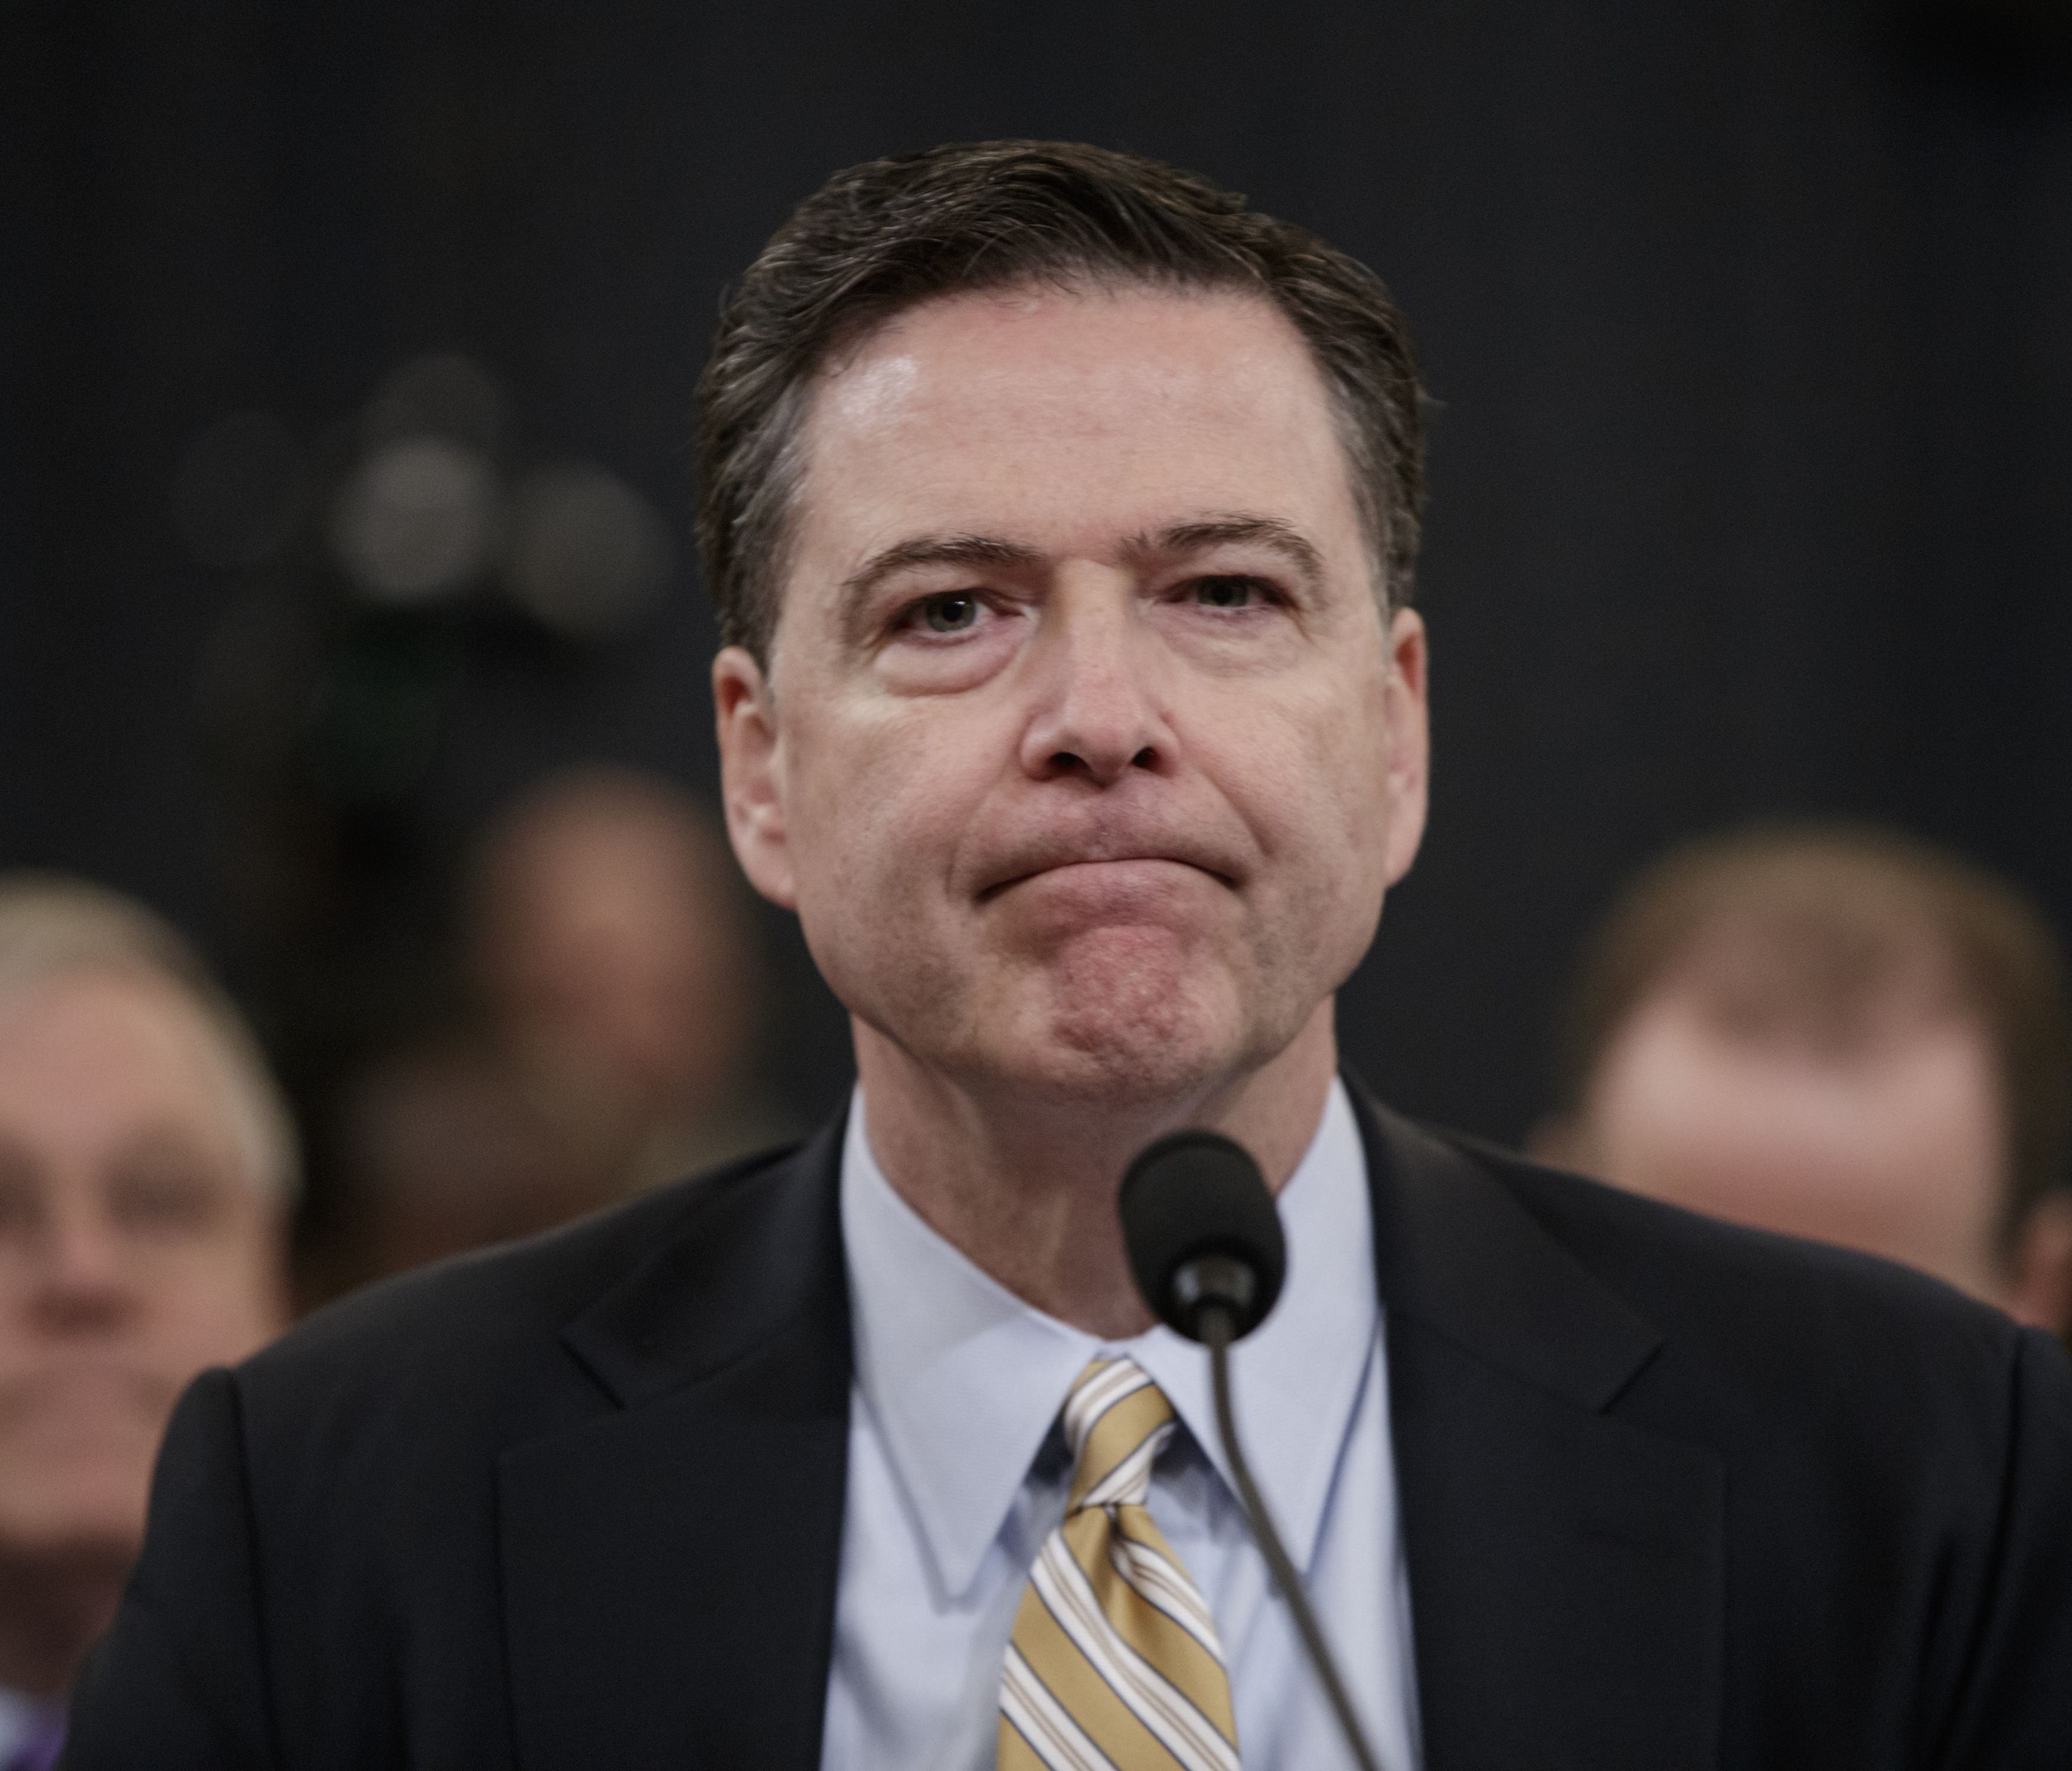 FBI Director James Comey pauses as he testifies March 20, 2017 before the House Intelligence Committee hearing on allegations of Russian interference in the 2016 U.S. presidential election.  Comey' will testify again Thursday before the Senate Intell